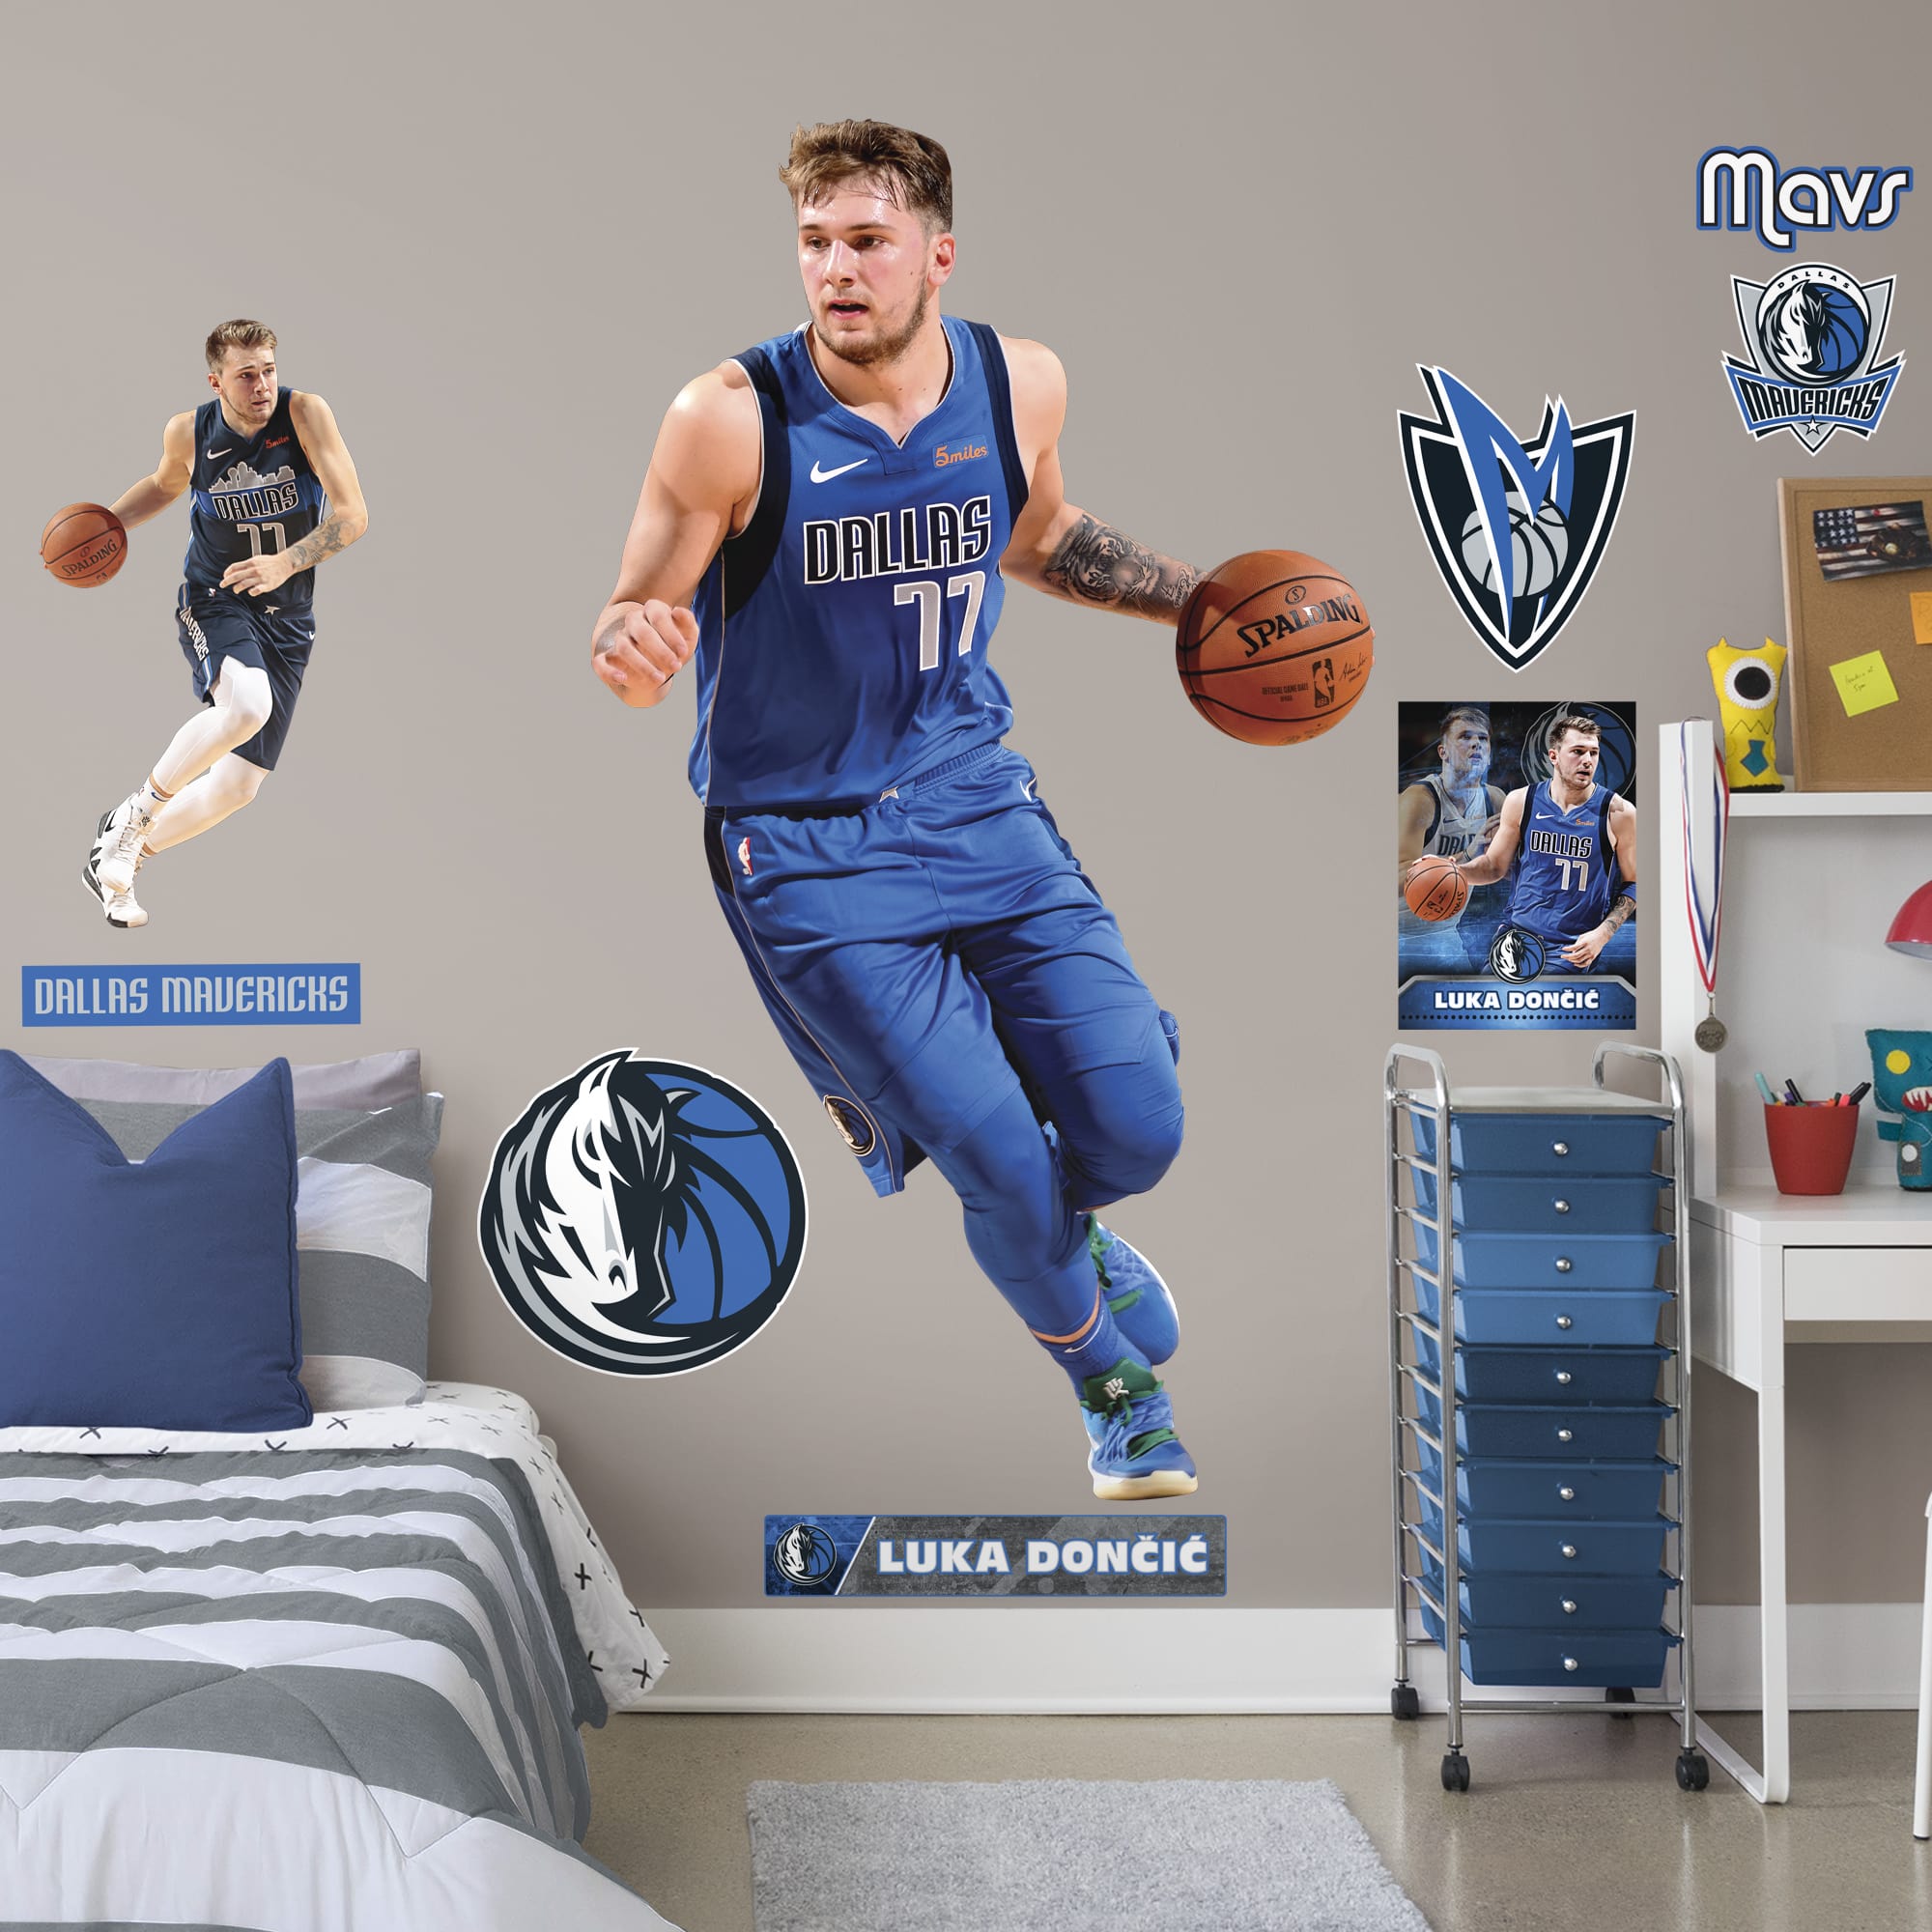 Luka Doncic for Dallas Mavericks - Officially Licensed NBA Removable Wall Decal Life-Size Athlete + 8 Decals (44"W x 77"H) by Fa